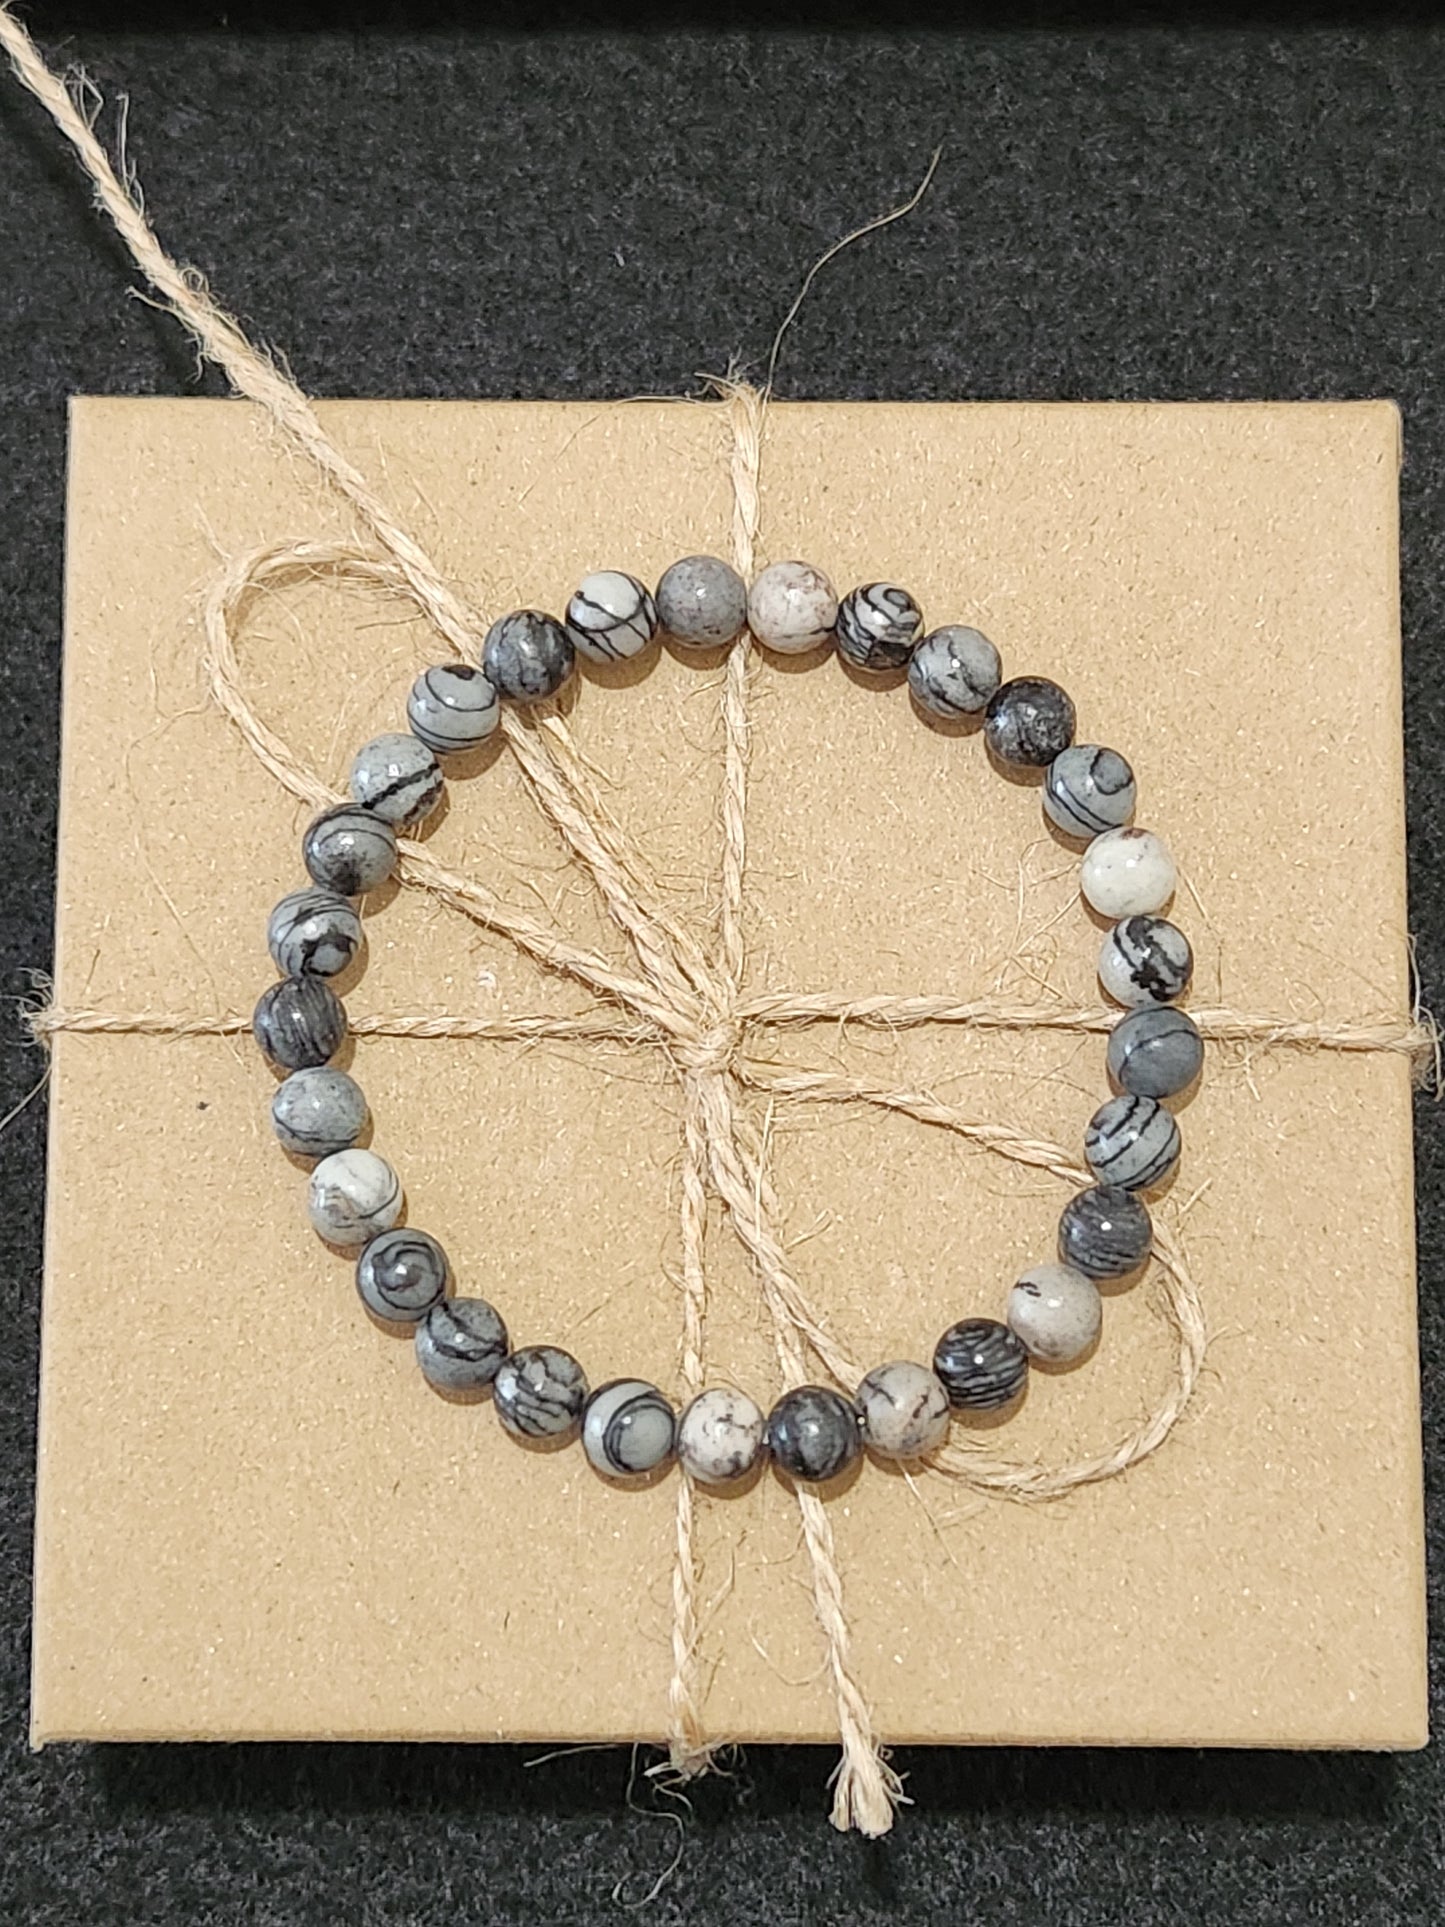 Spider Web Jasper Stone Beaded bracelet - 6mm stones - kindness - wholeness - compassion - connections